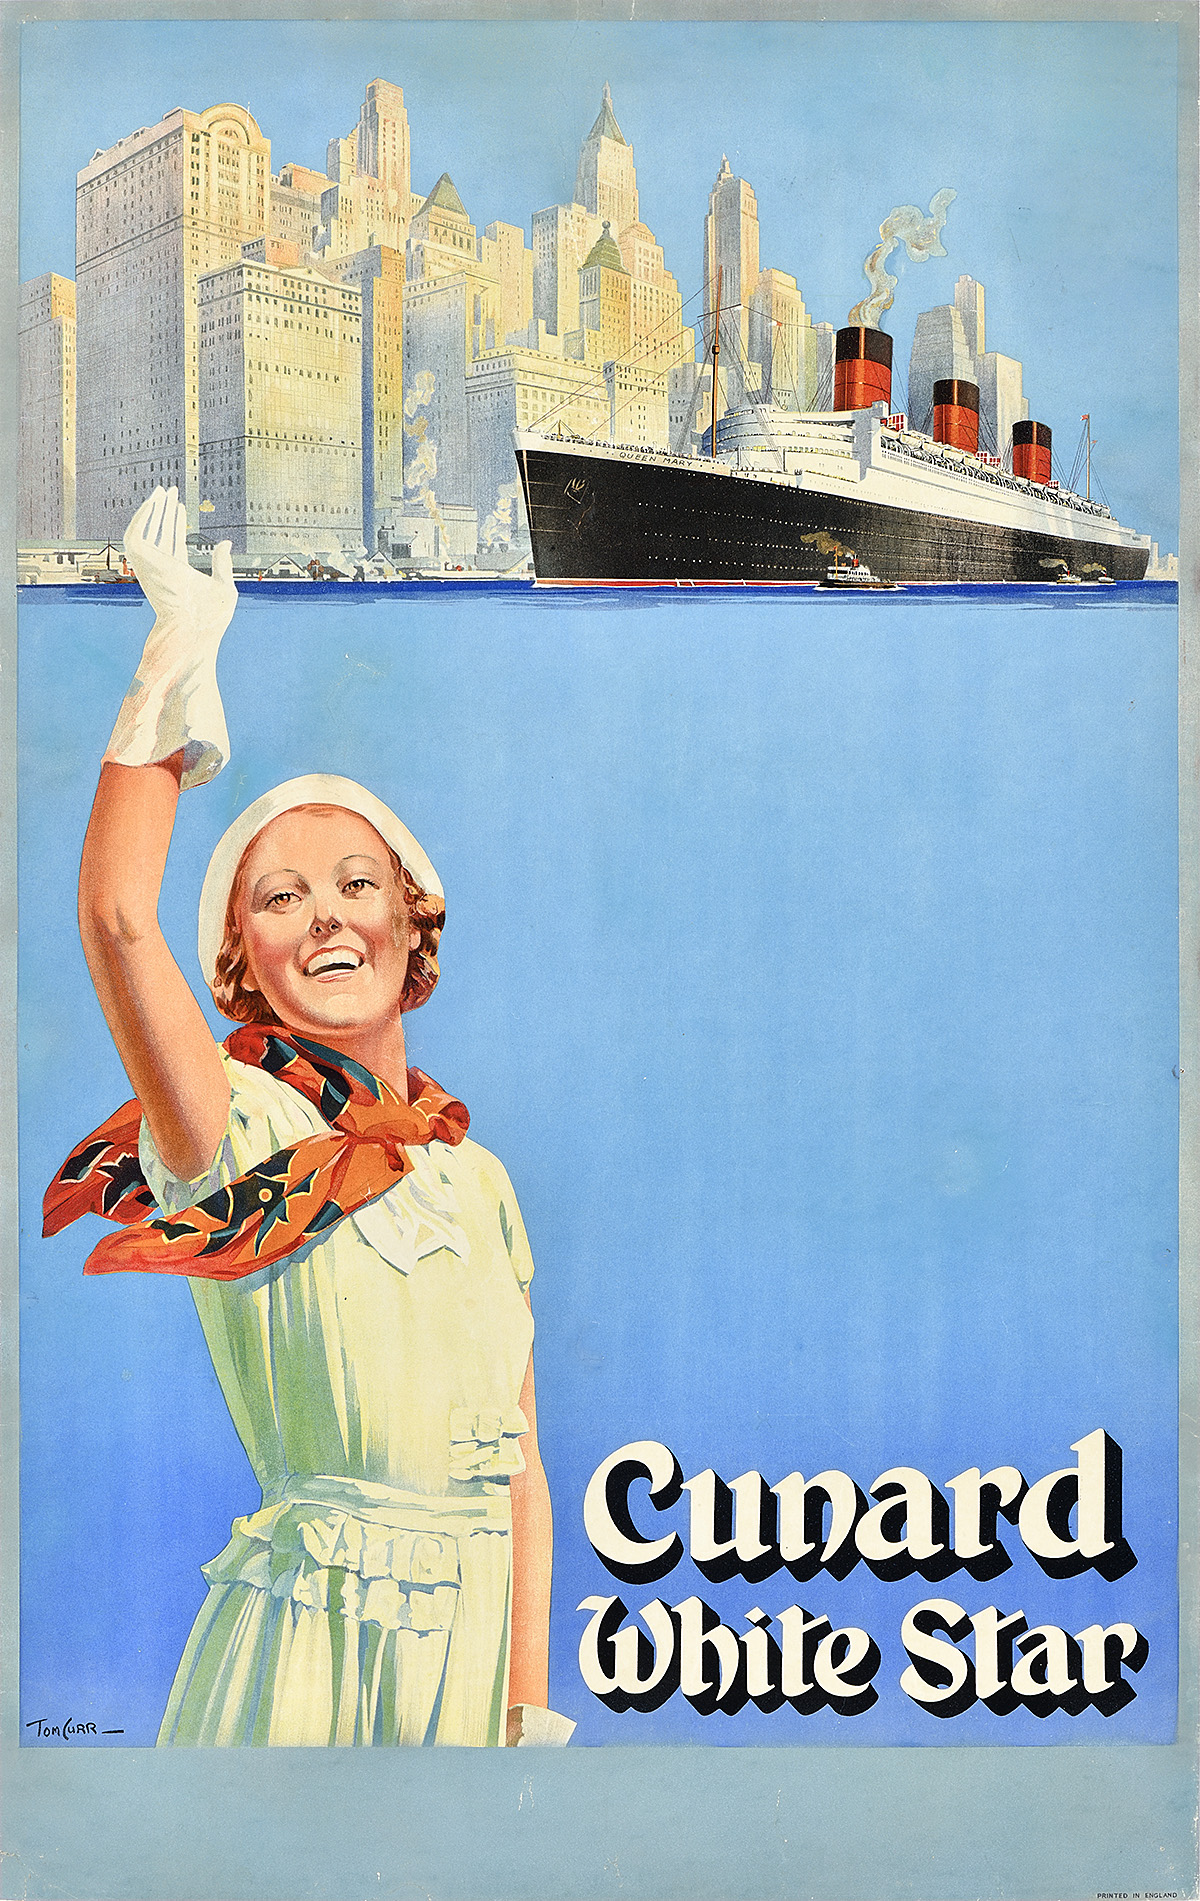 A poster of a white woman waving with a long ship with 3 funnels and a skyline behind her.